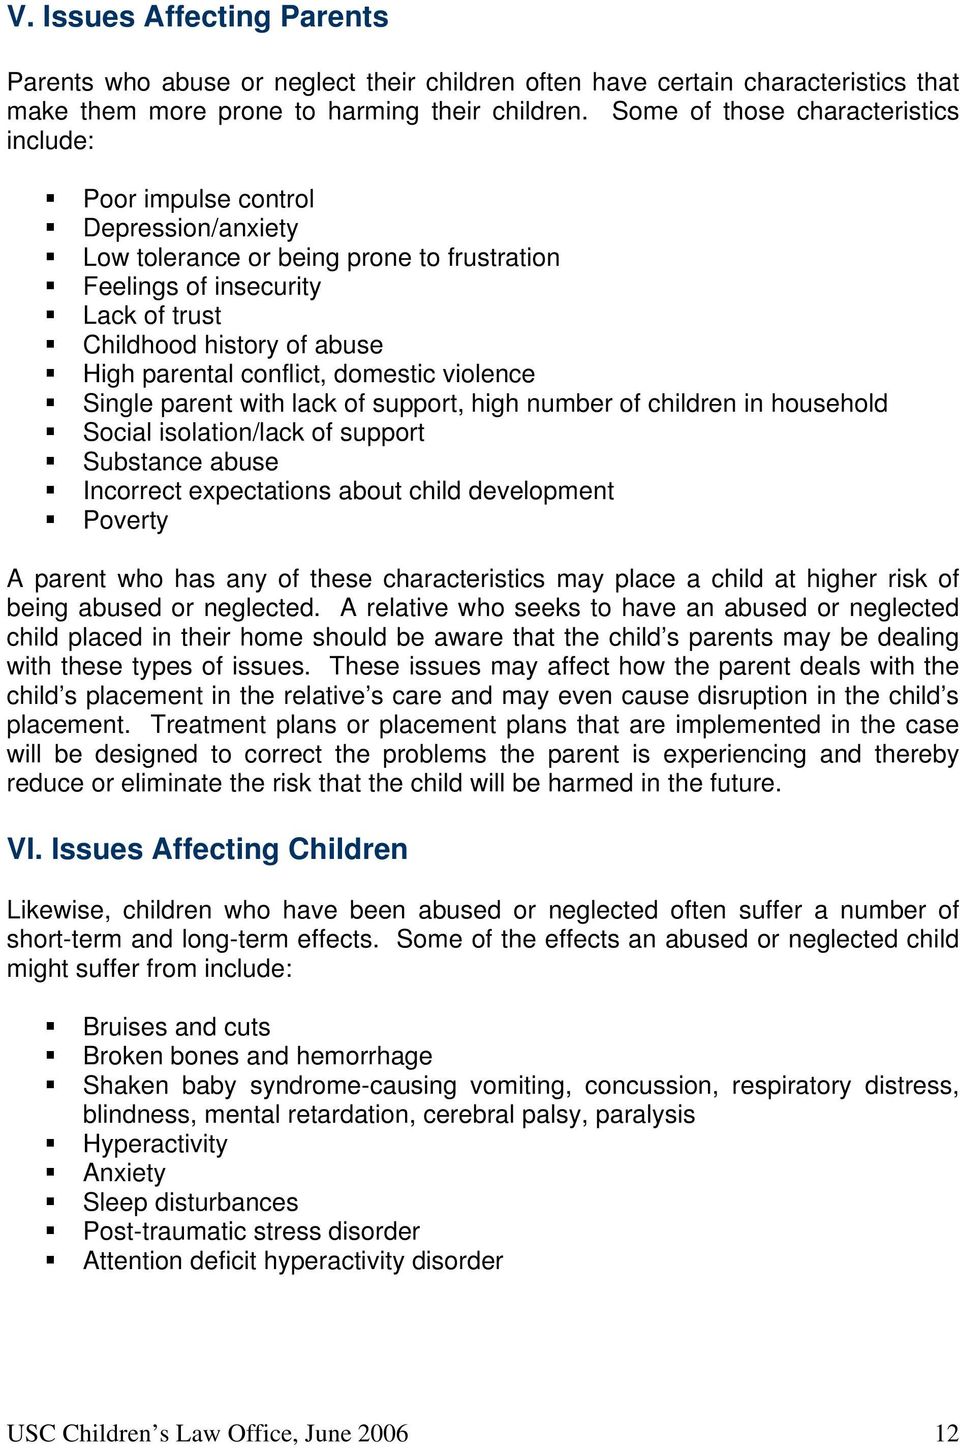 parental conflict, domestic violence Single parent with lack of support, high number of children in household Social isolation/lack of support Substance abuse Incorrect expectations about child